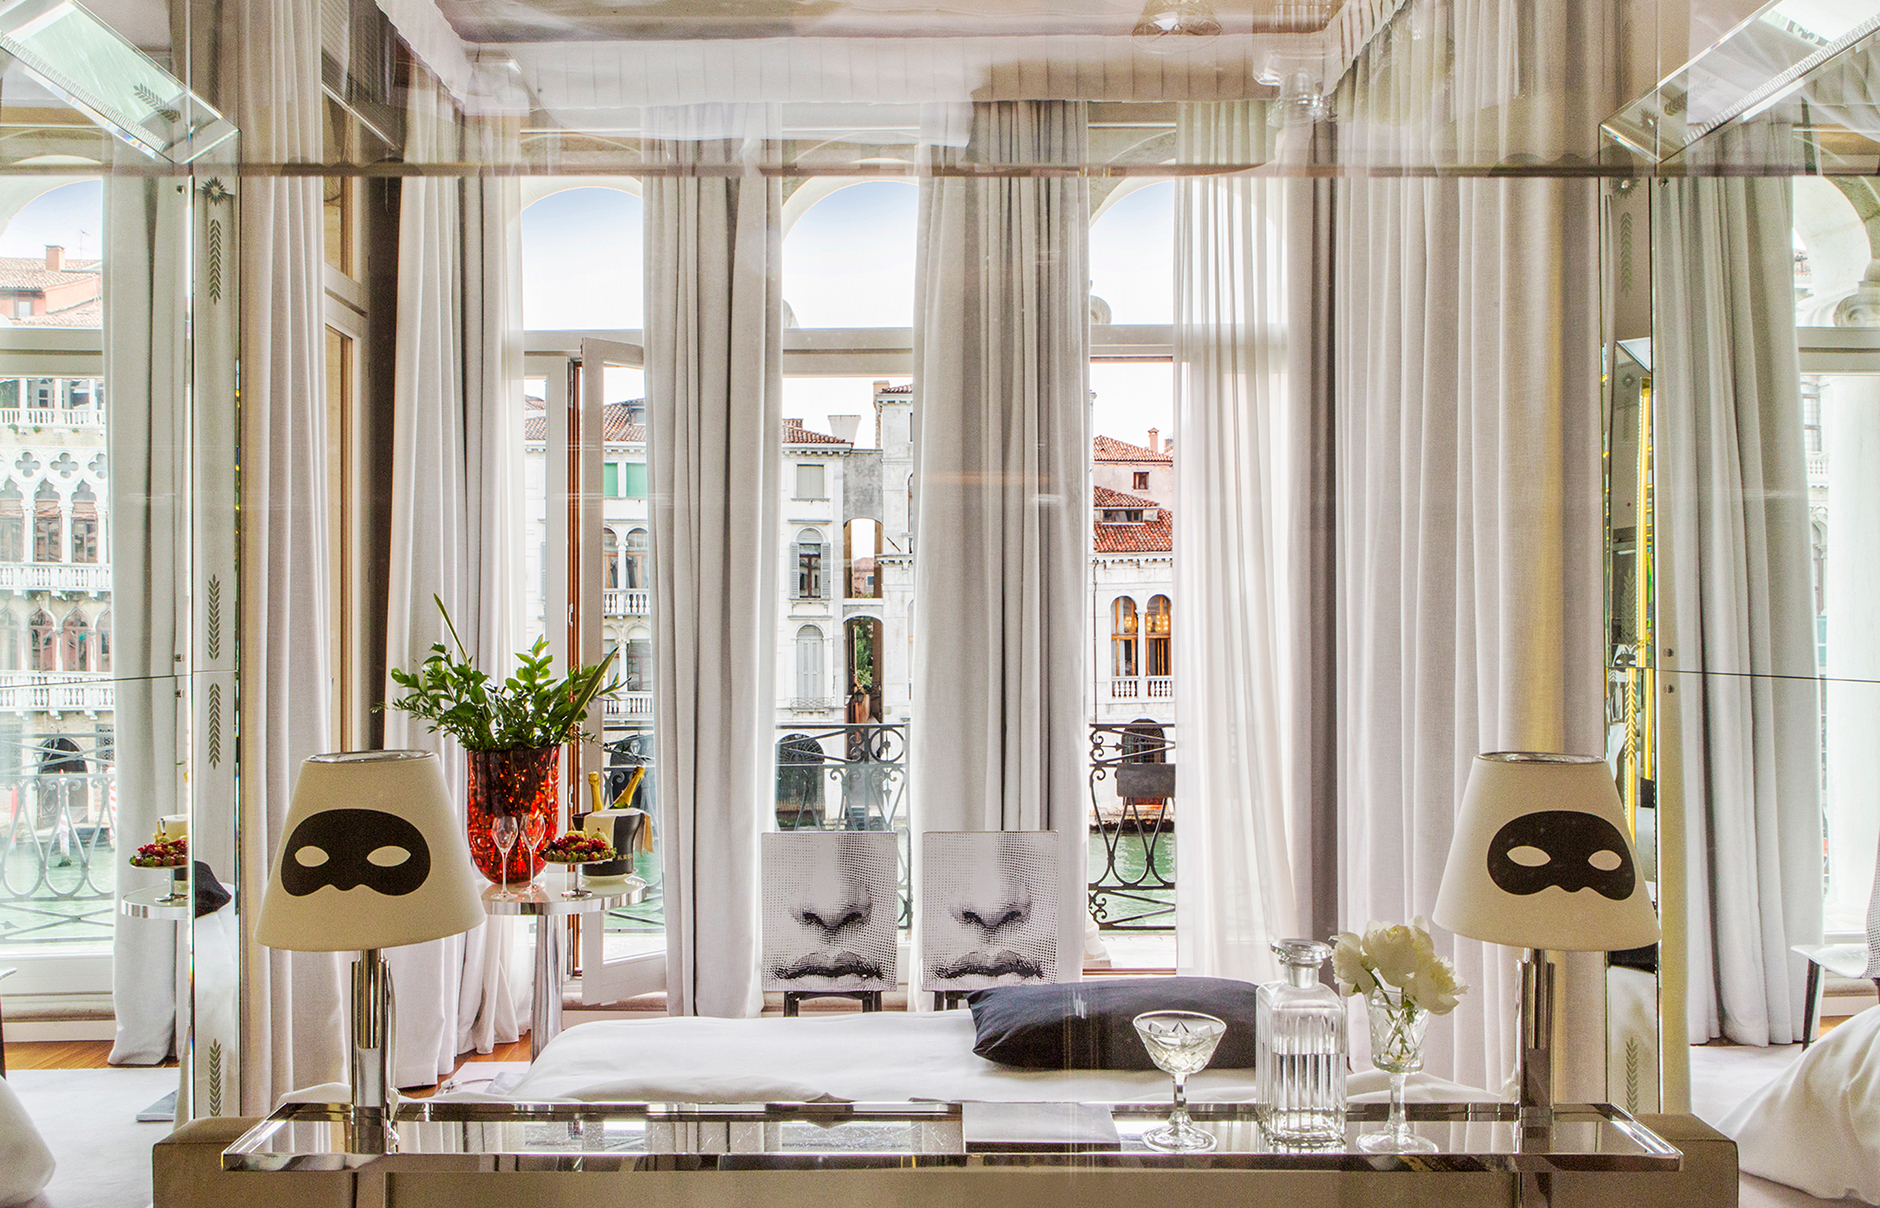 Palazzina Grassi Venice Italy Luxury Hotel Review By